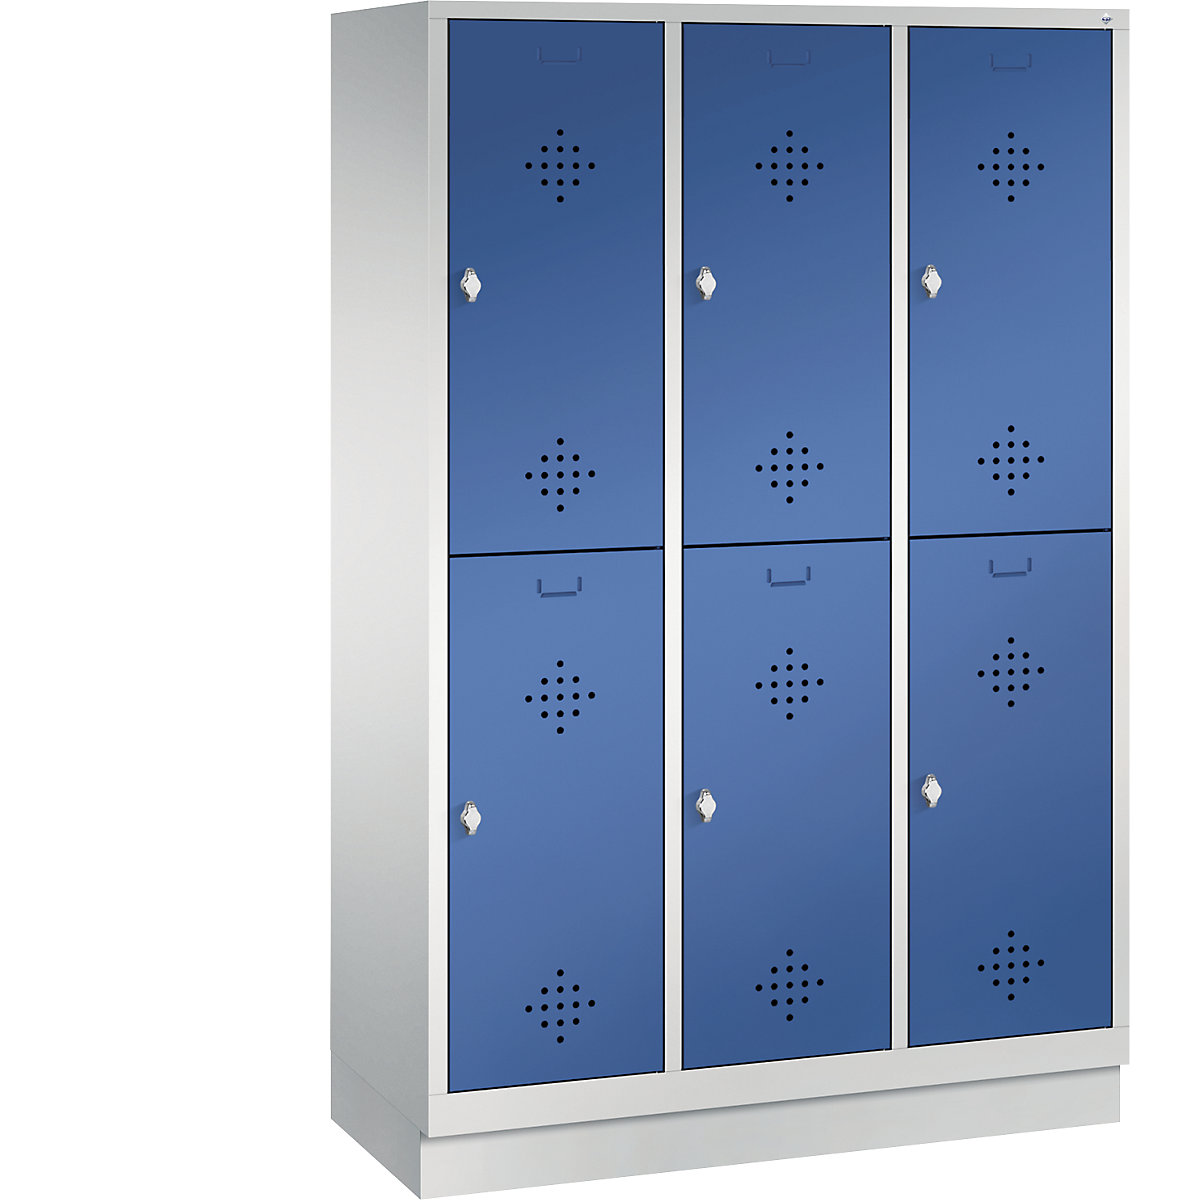 CLASSIC cloakroom locker with plinth, double tier – C+P, 3 compartments, 2 shelf compartments each, compartment width 400 mm, light grey / gentian blue-6